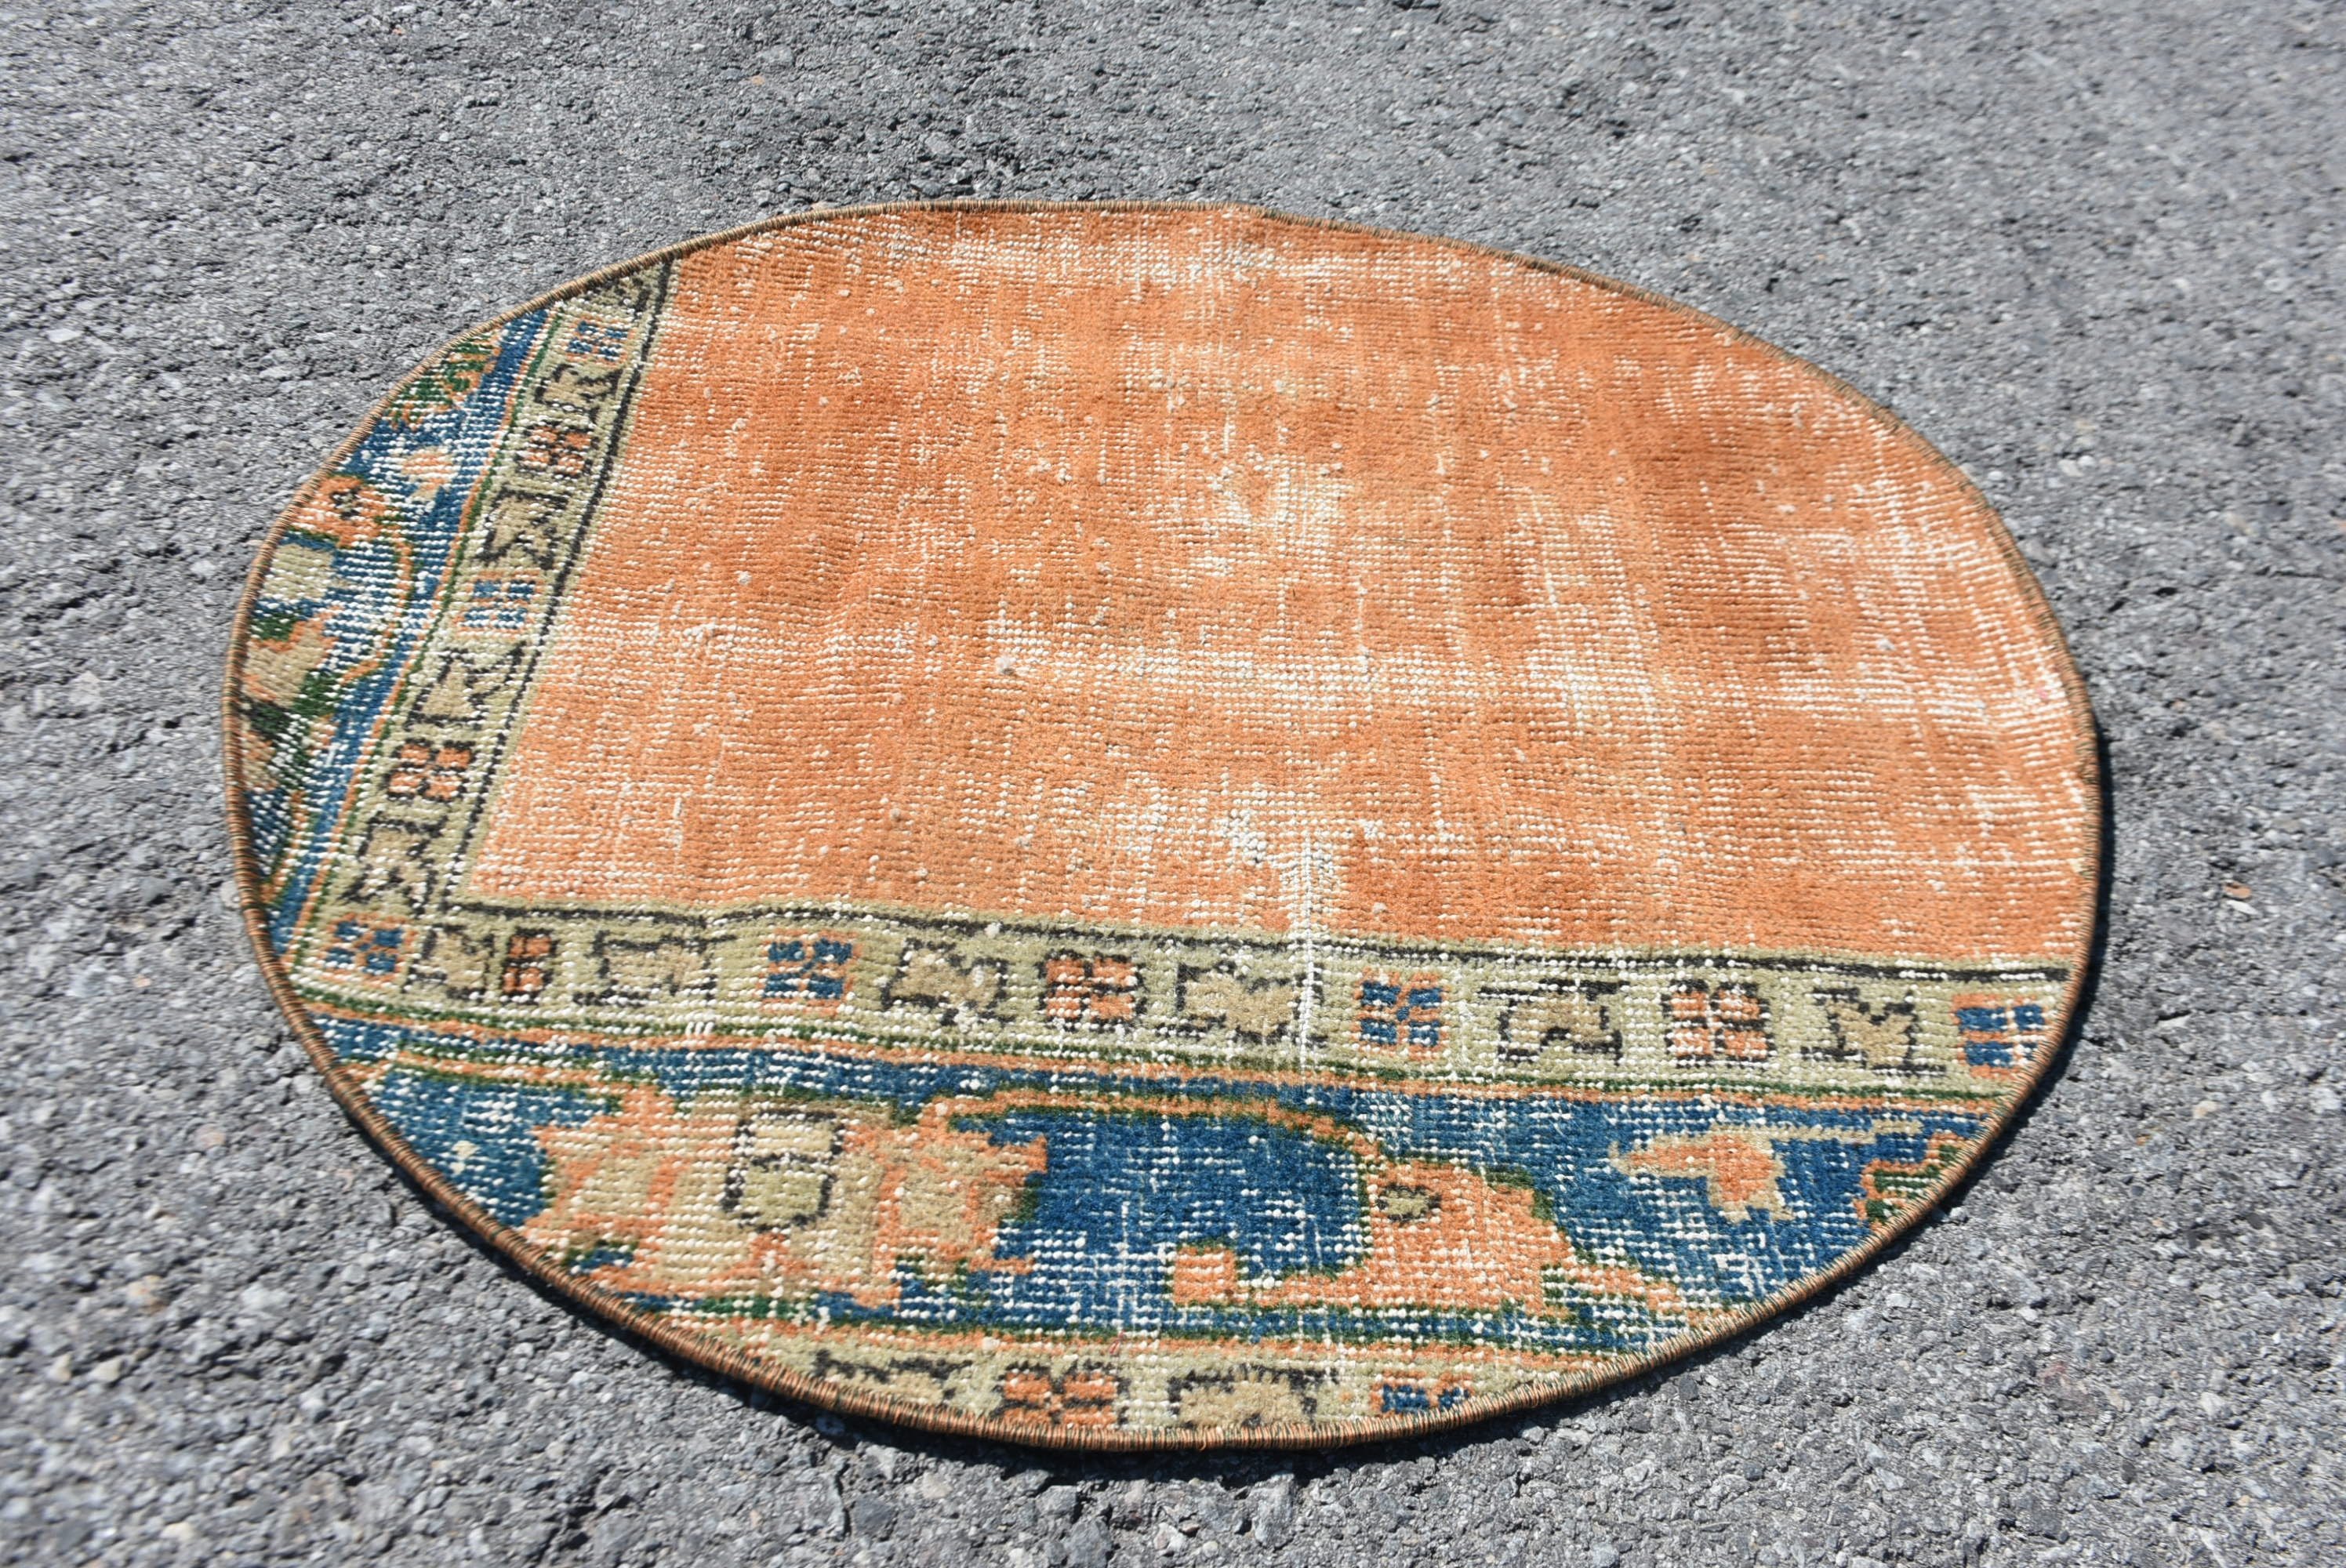 Bedroom Rug, Kitchen Rug, Entry Rugs, Rugs for Kitchen, Vintage Rugs, Orange Anatolian Rug, Oushak Rug, Turkish Rug, 2.2x2.3 ft Small Rugs